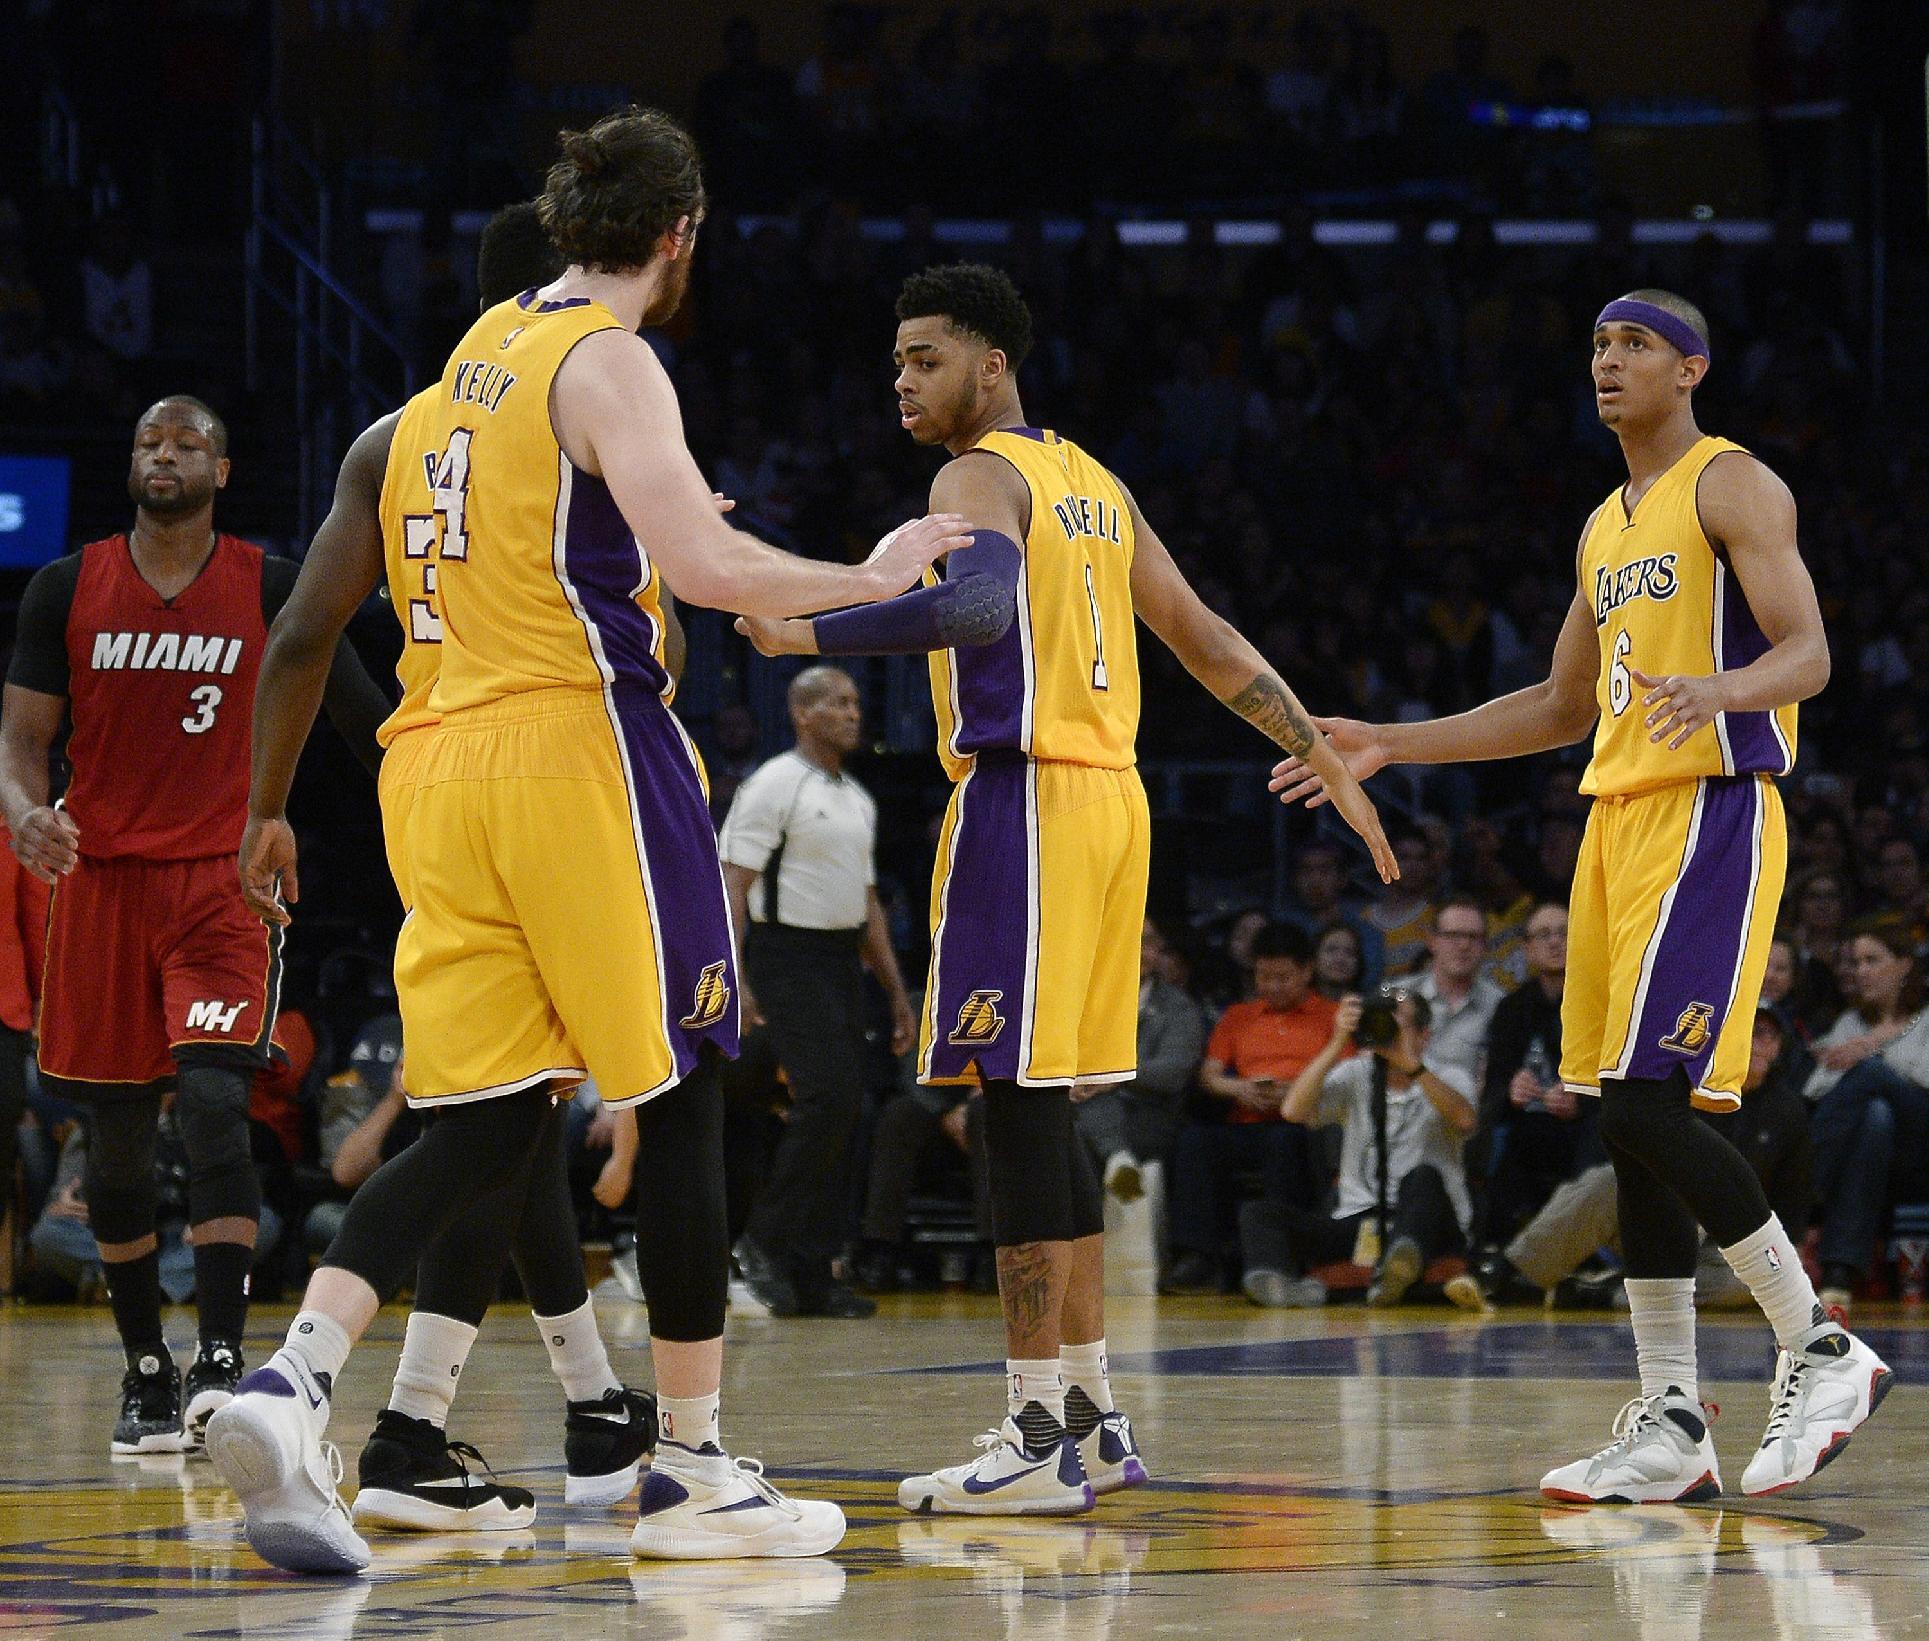 D'Angelo Russell reaches out to his teammates. (Kevork Djansezian/Getty Images)